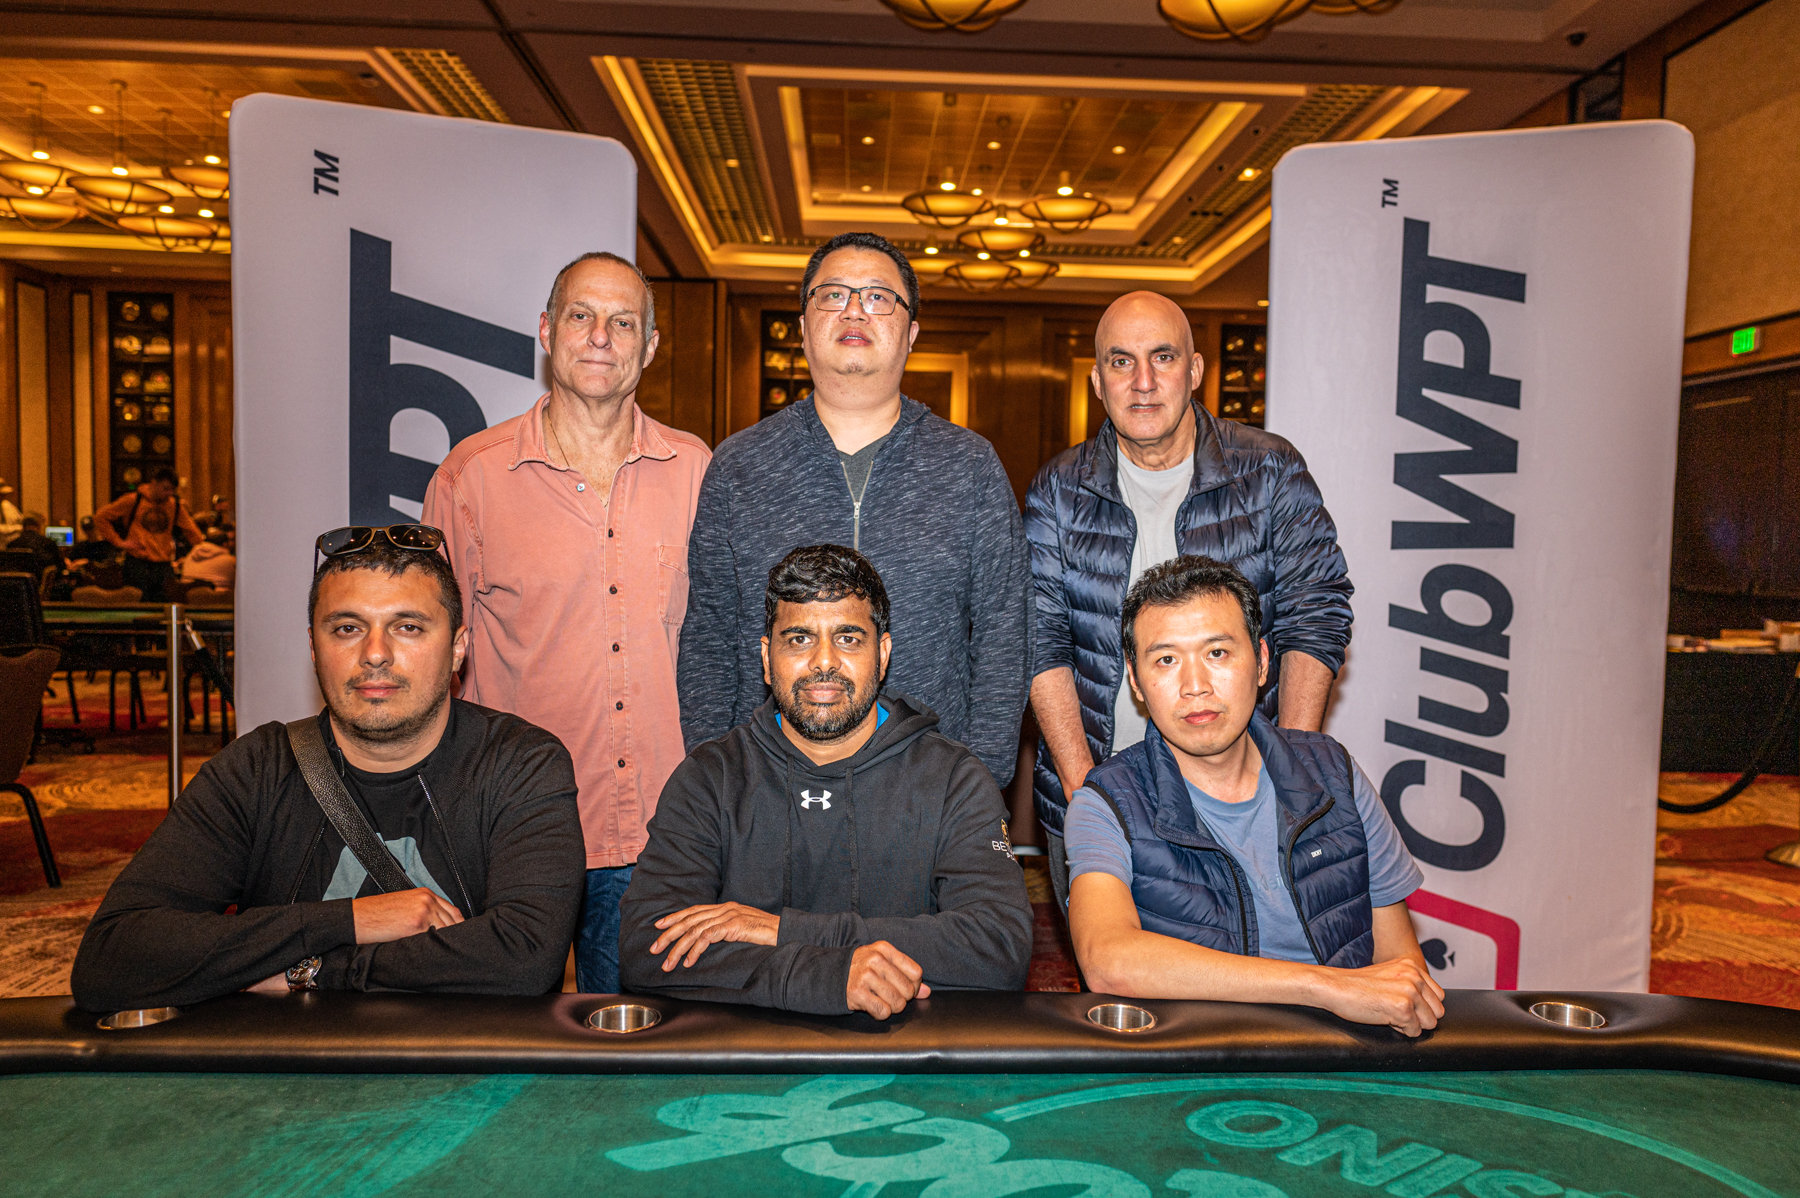 WPT Begins Three Days of Final Table Livestreams Today with Seminole Hard Rock Poker Showdown